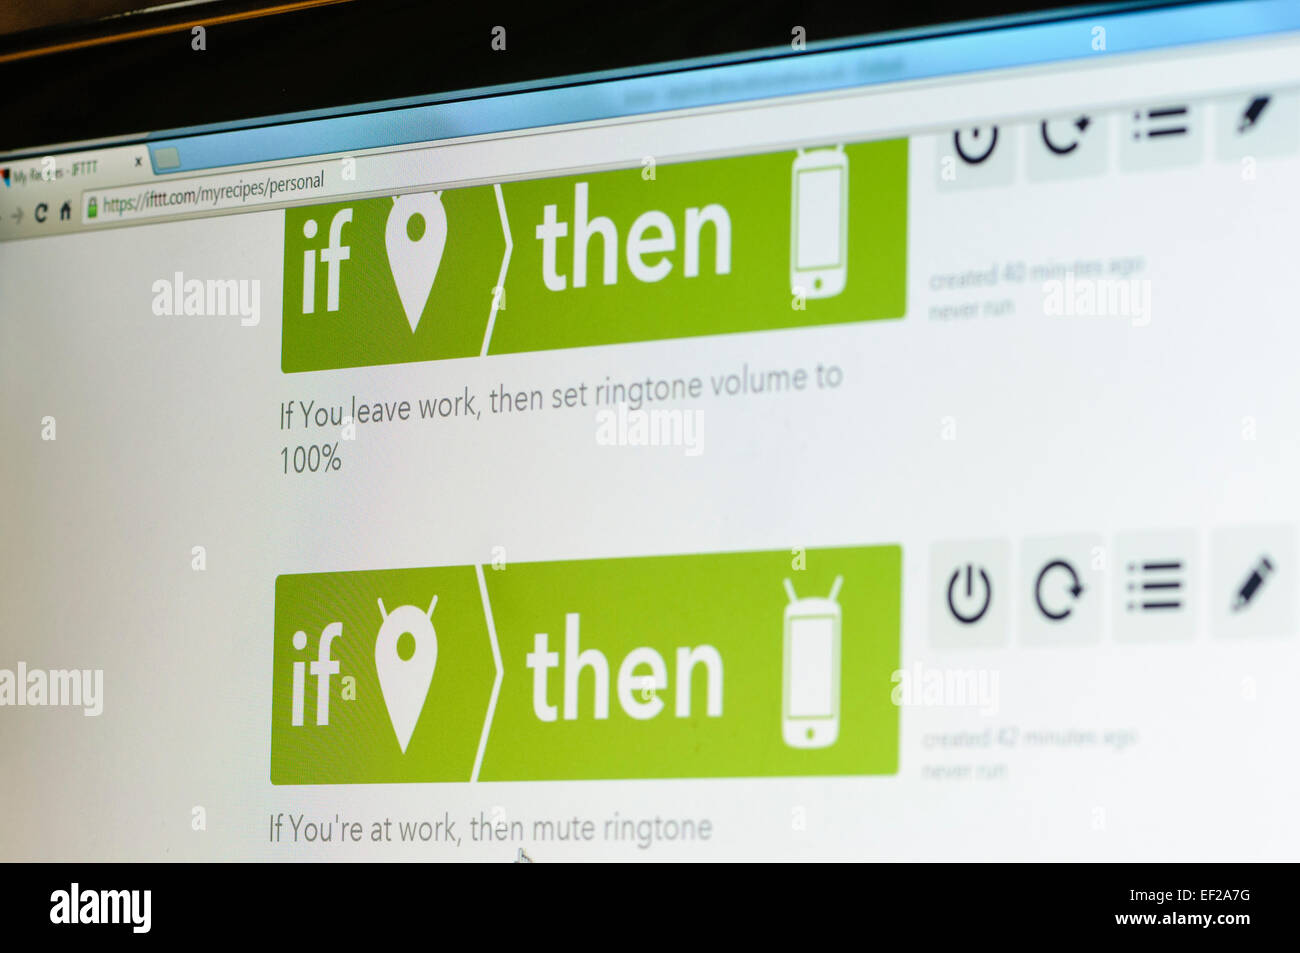 Screenshot from IFTTT (If Then Then That) at http://ift.tt, a website which helps automate activities and tasks between mobile p Stock Photo